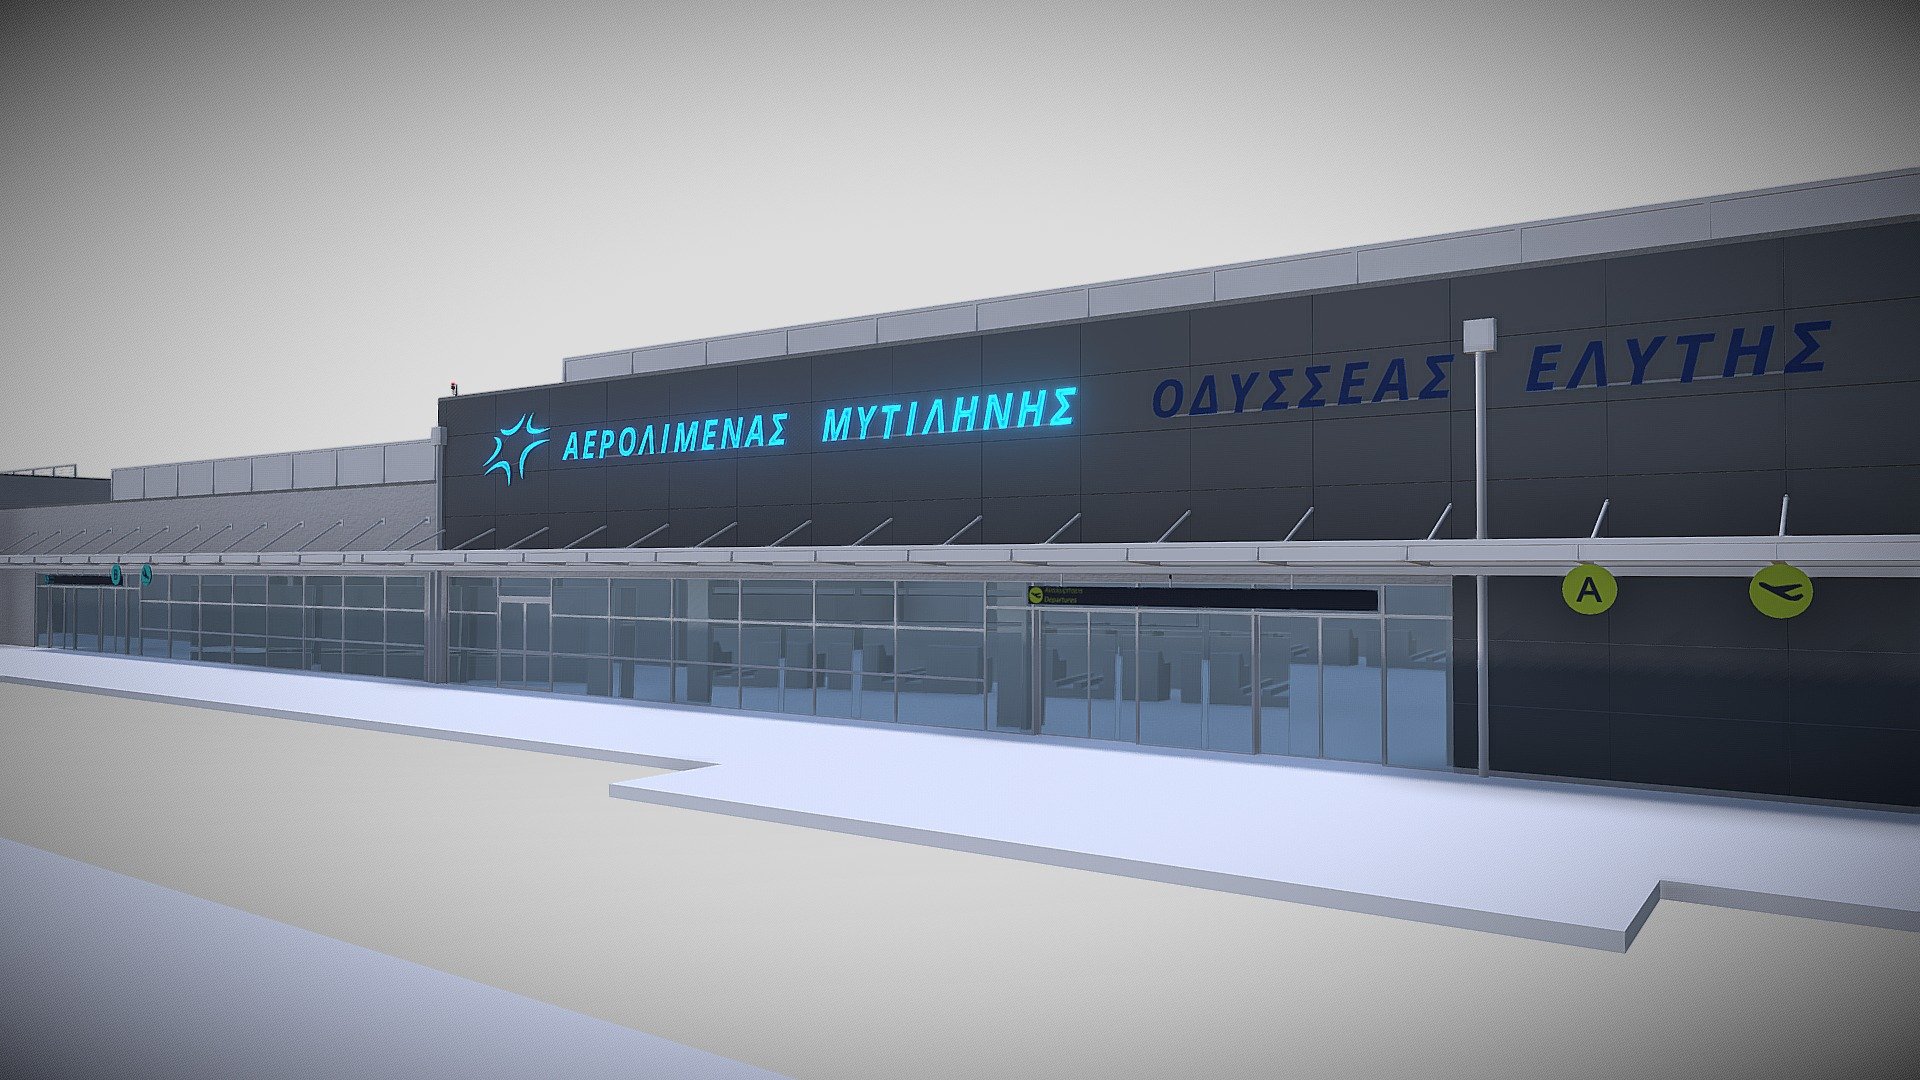 This is a work in progress model of the main terminal for Mytilene International Airport on the island of Lesvos in Greece. The model will be used for a new Microsoft Flight Simulator scenery by Foxtrot Scenery Desgin featuring a fully detailed exterior and interior model as well as surroundings 3d model